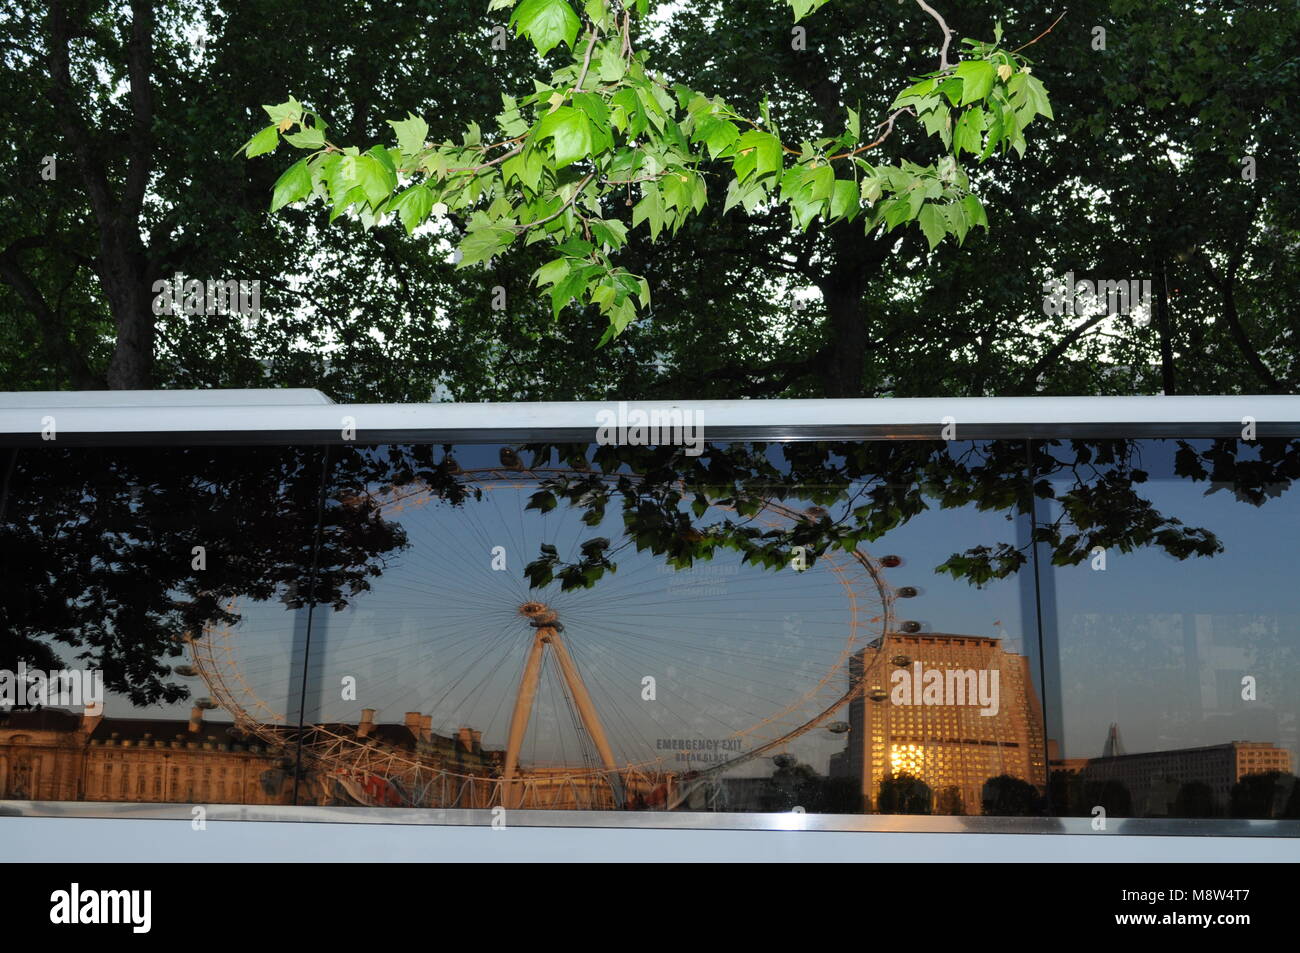 London Eye and Shell Centre reflected in a coach window, London, UK. Stock Photo